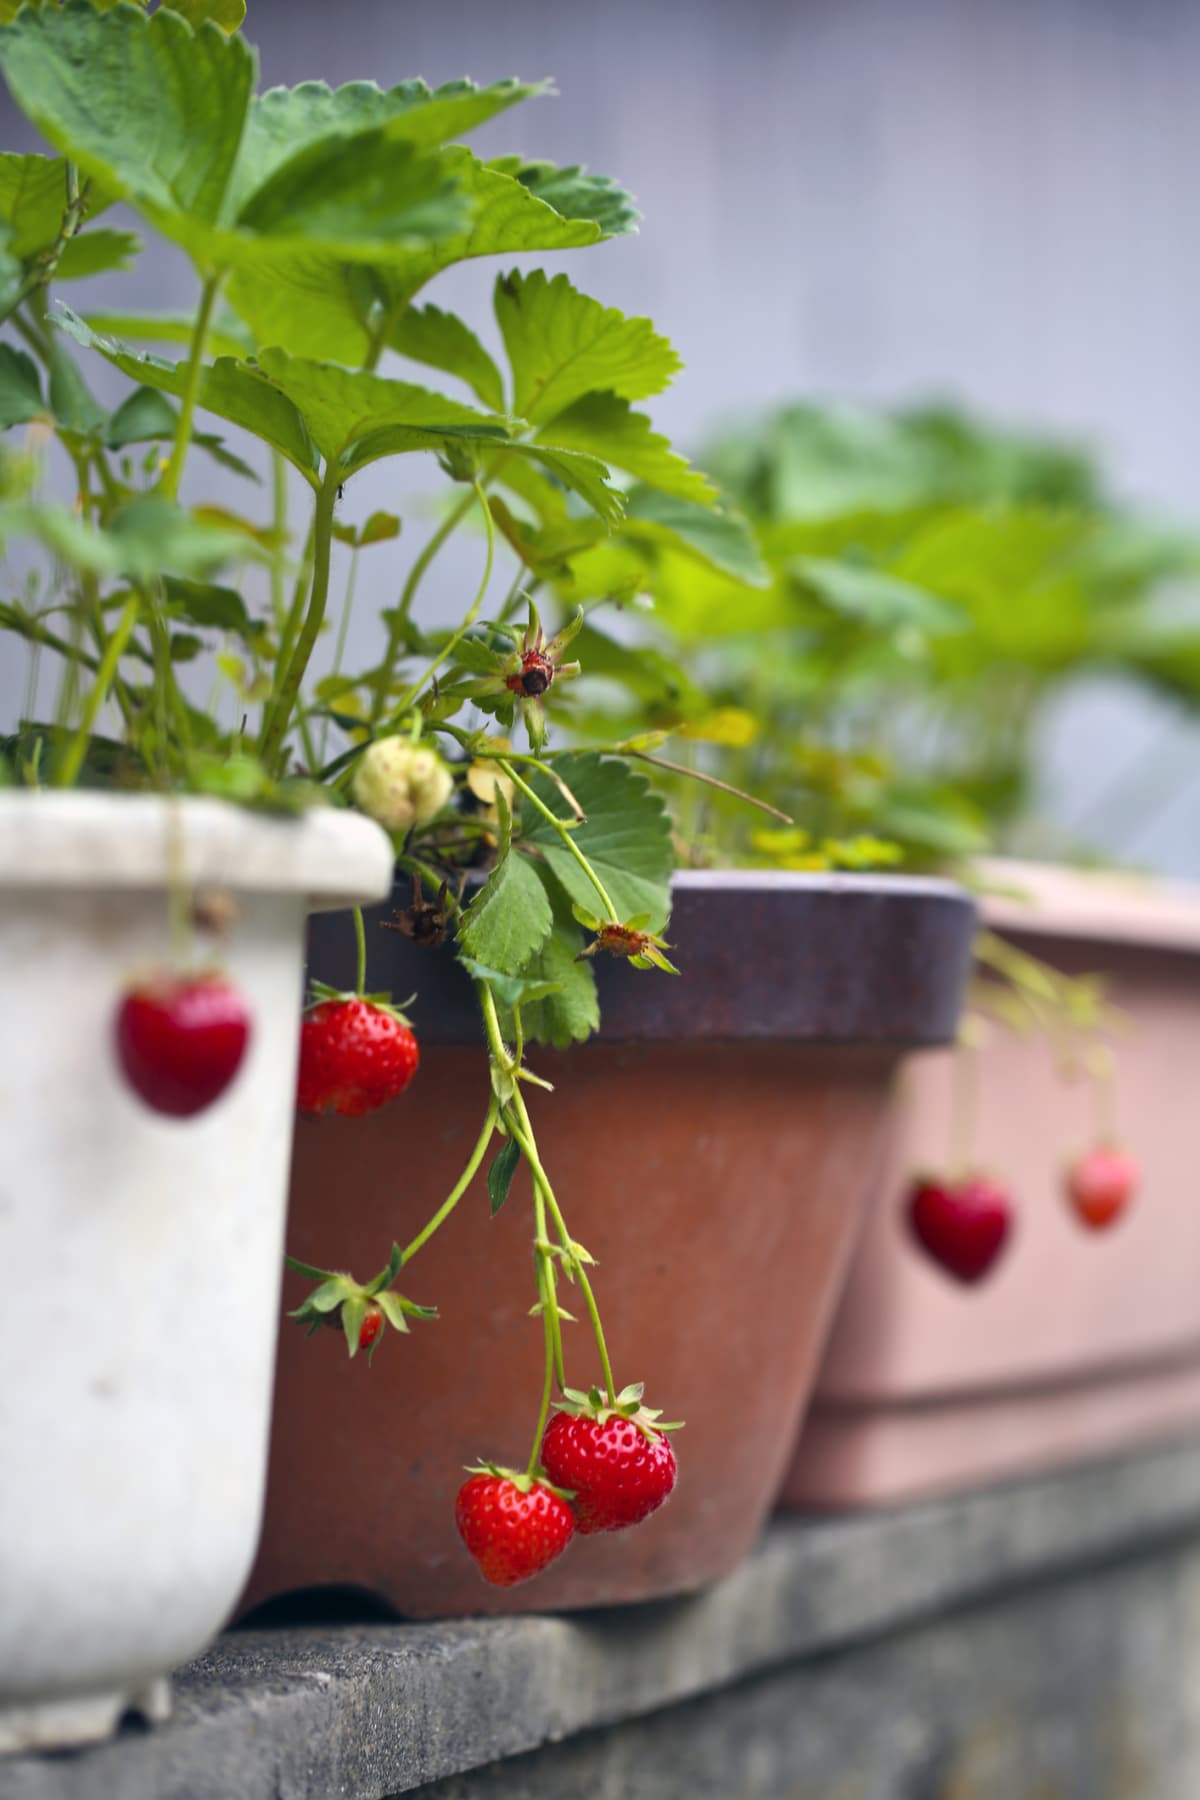 Strawberry growing in the pot